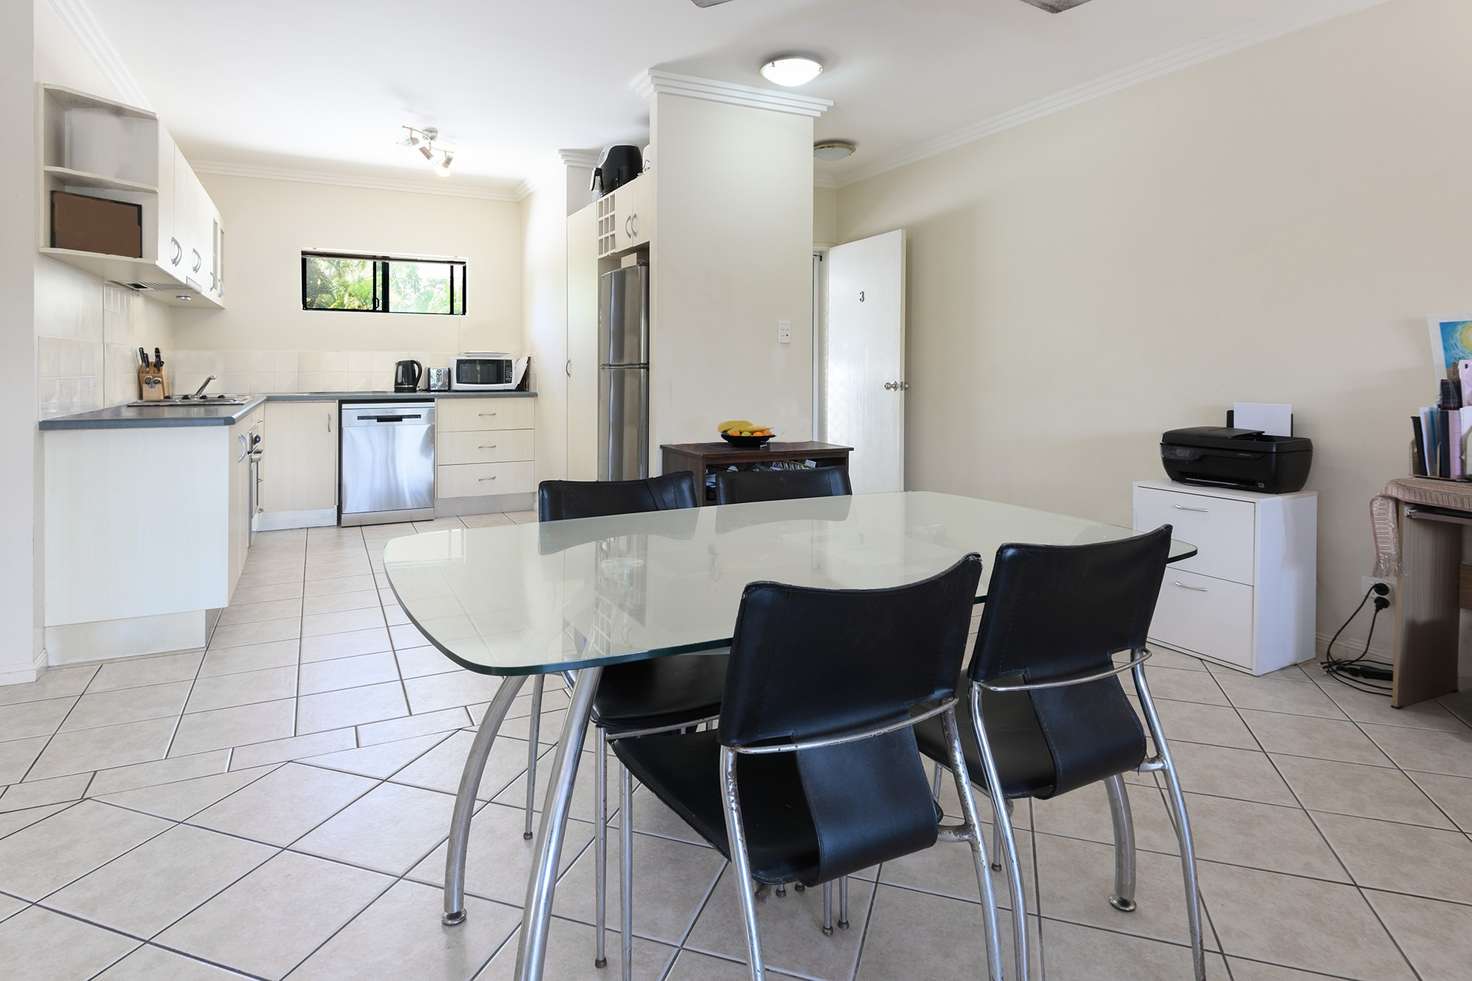 Main view of Homely unit listing, 3/1 Morning Close, Port Douglas QLD 4877